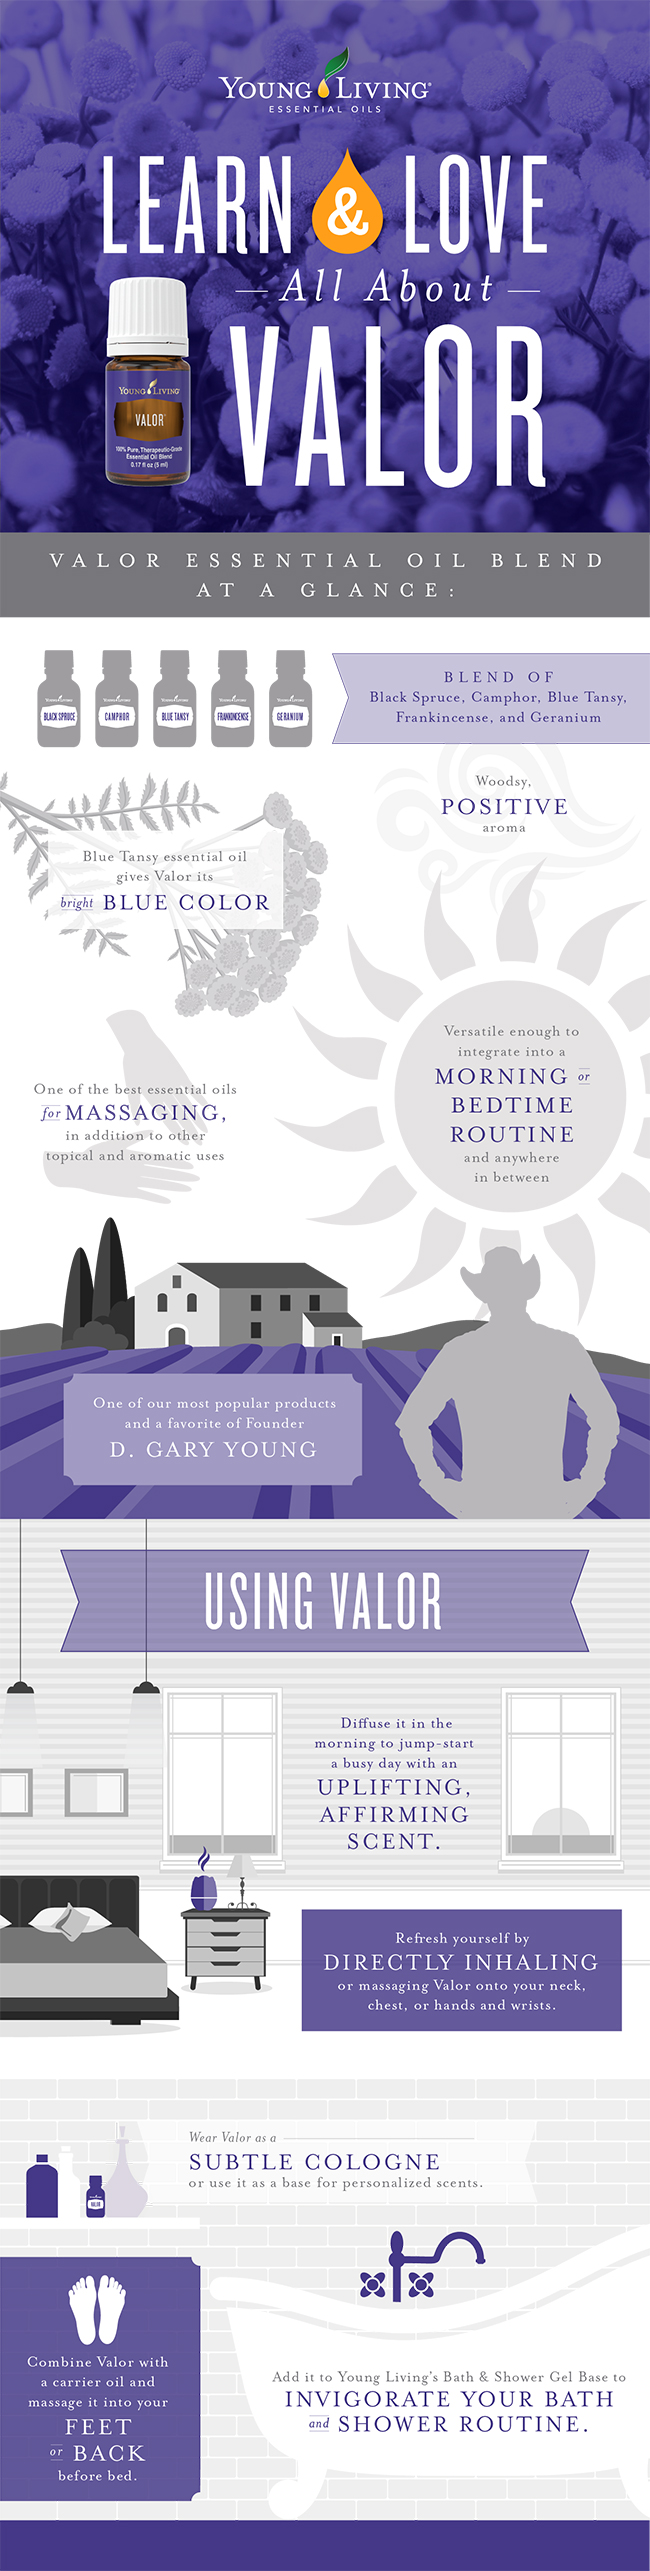 Young Living Valor Infographic